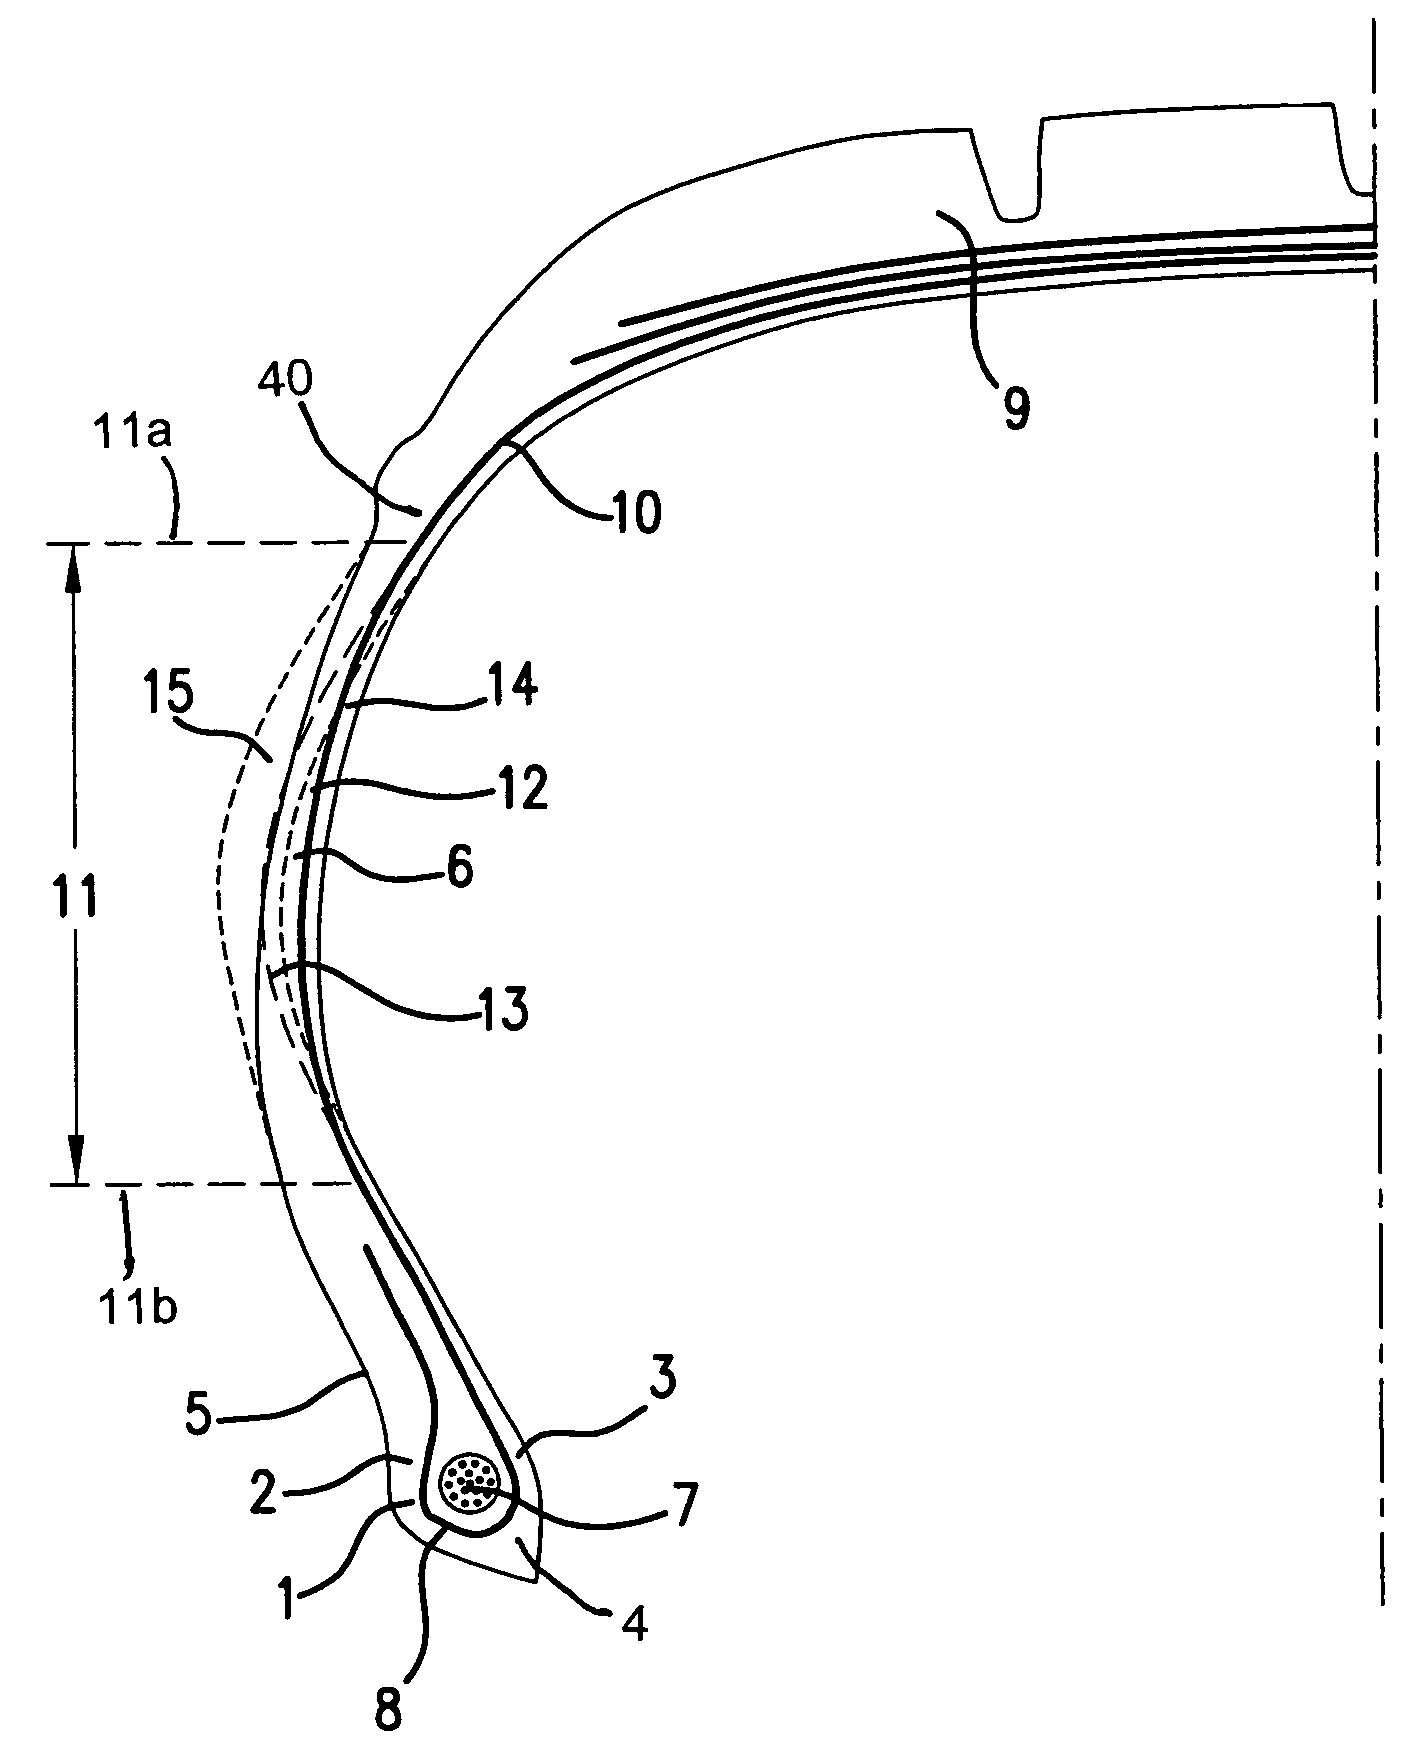 Extended mobility tire with undulating sidewalls